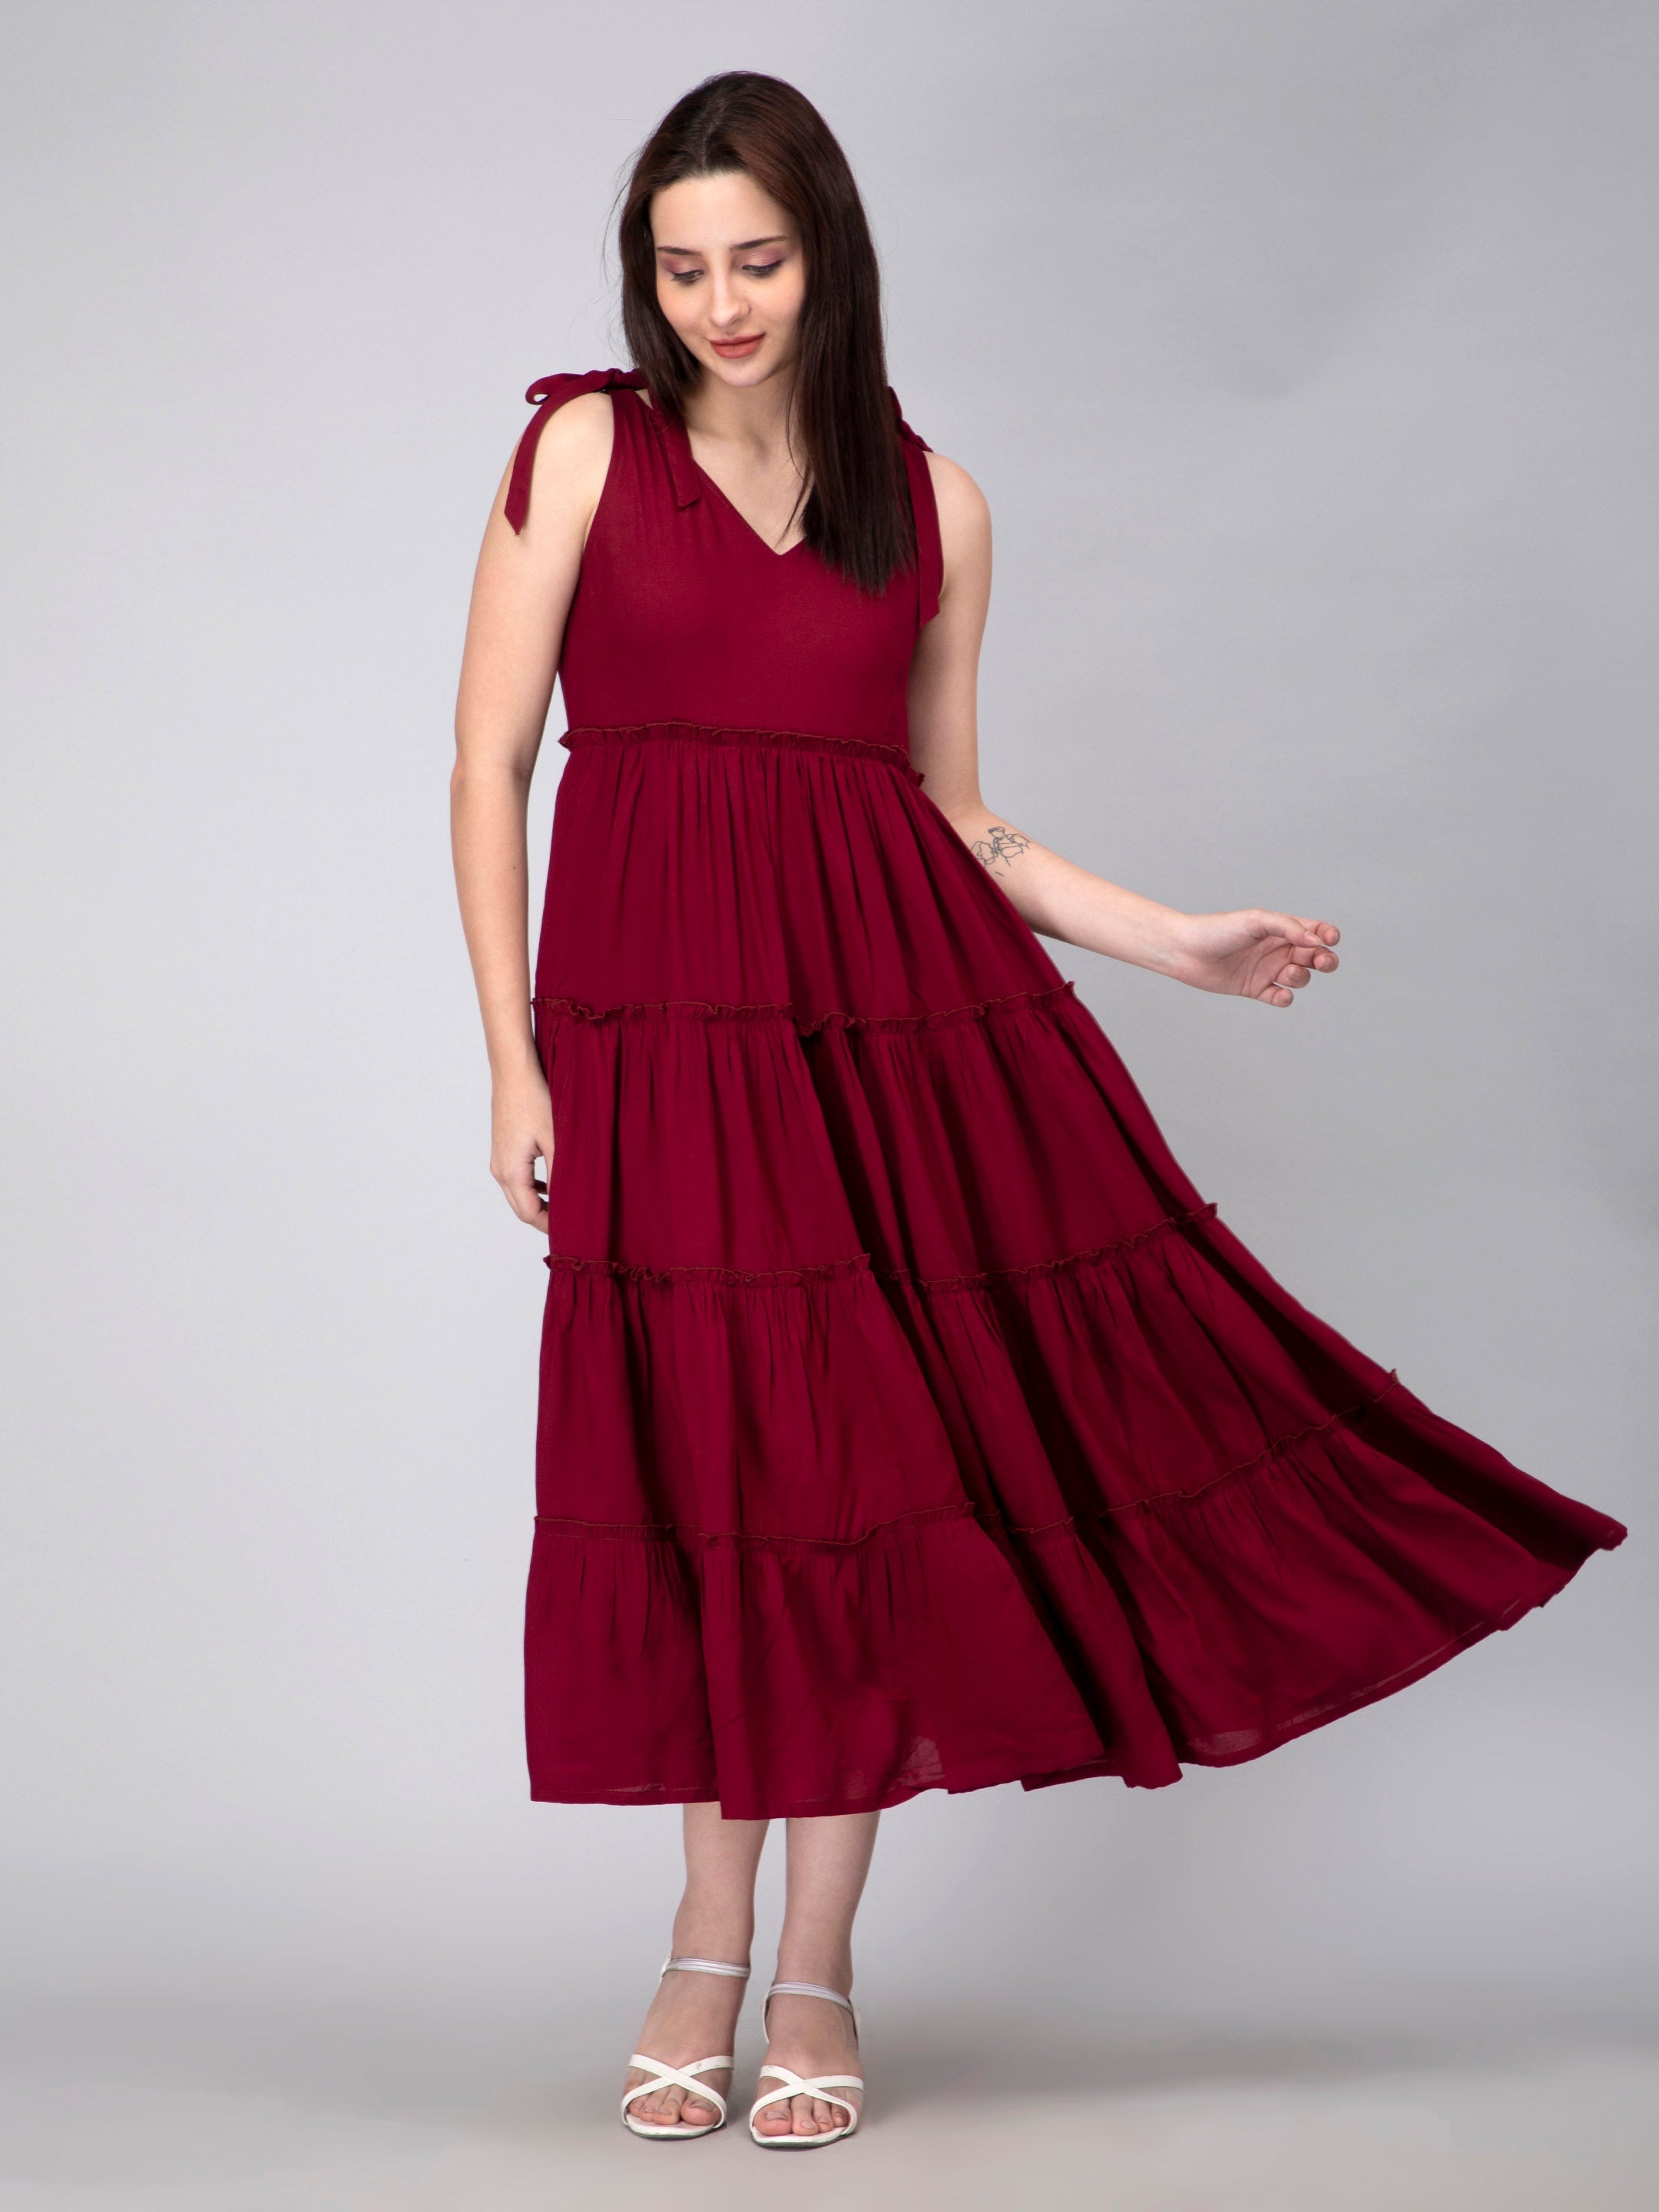 solid-maroon-tier-dress-with-full-bottom